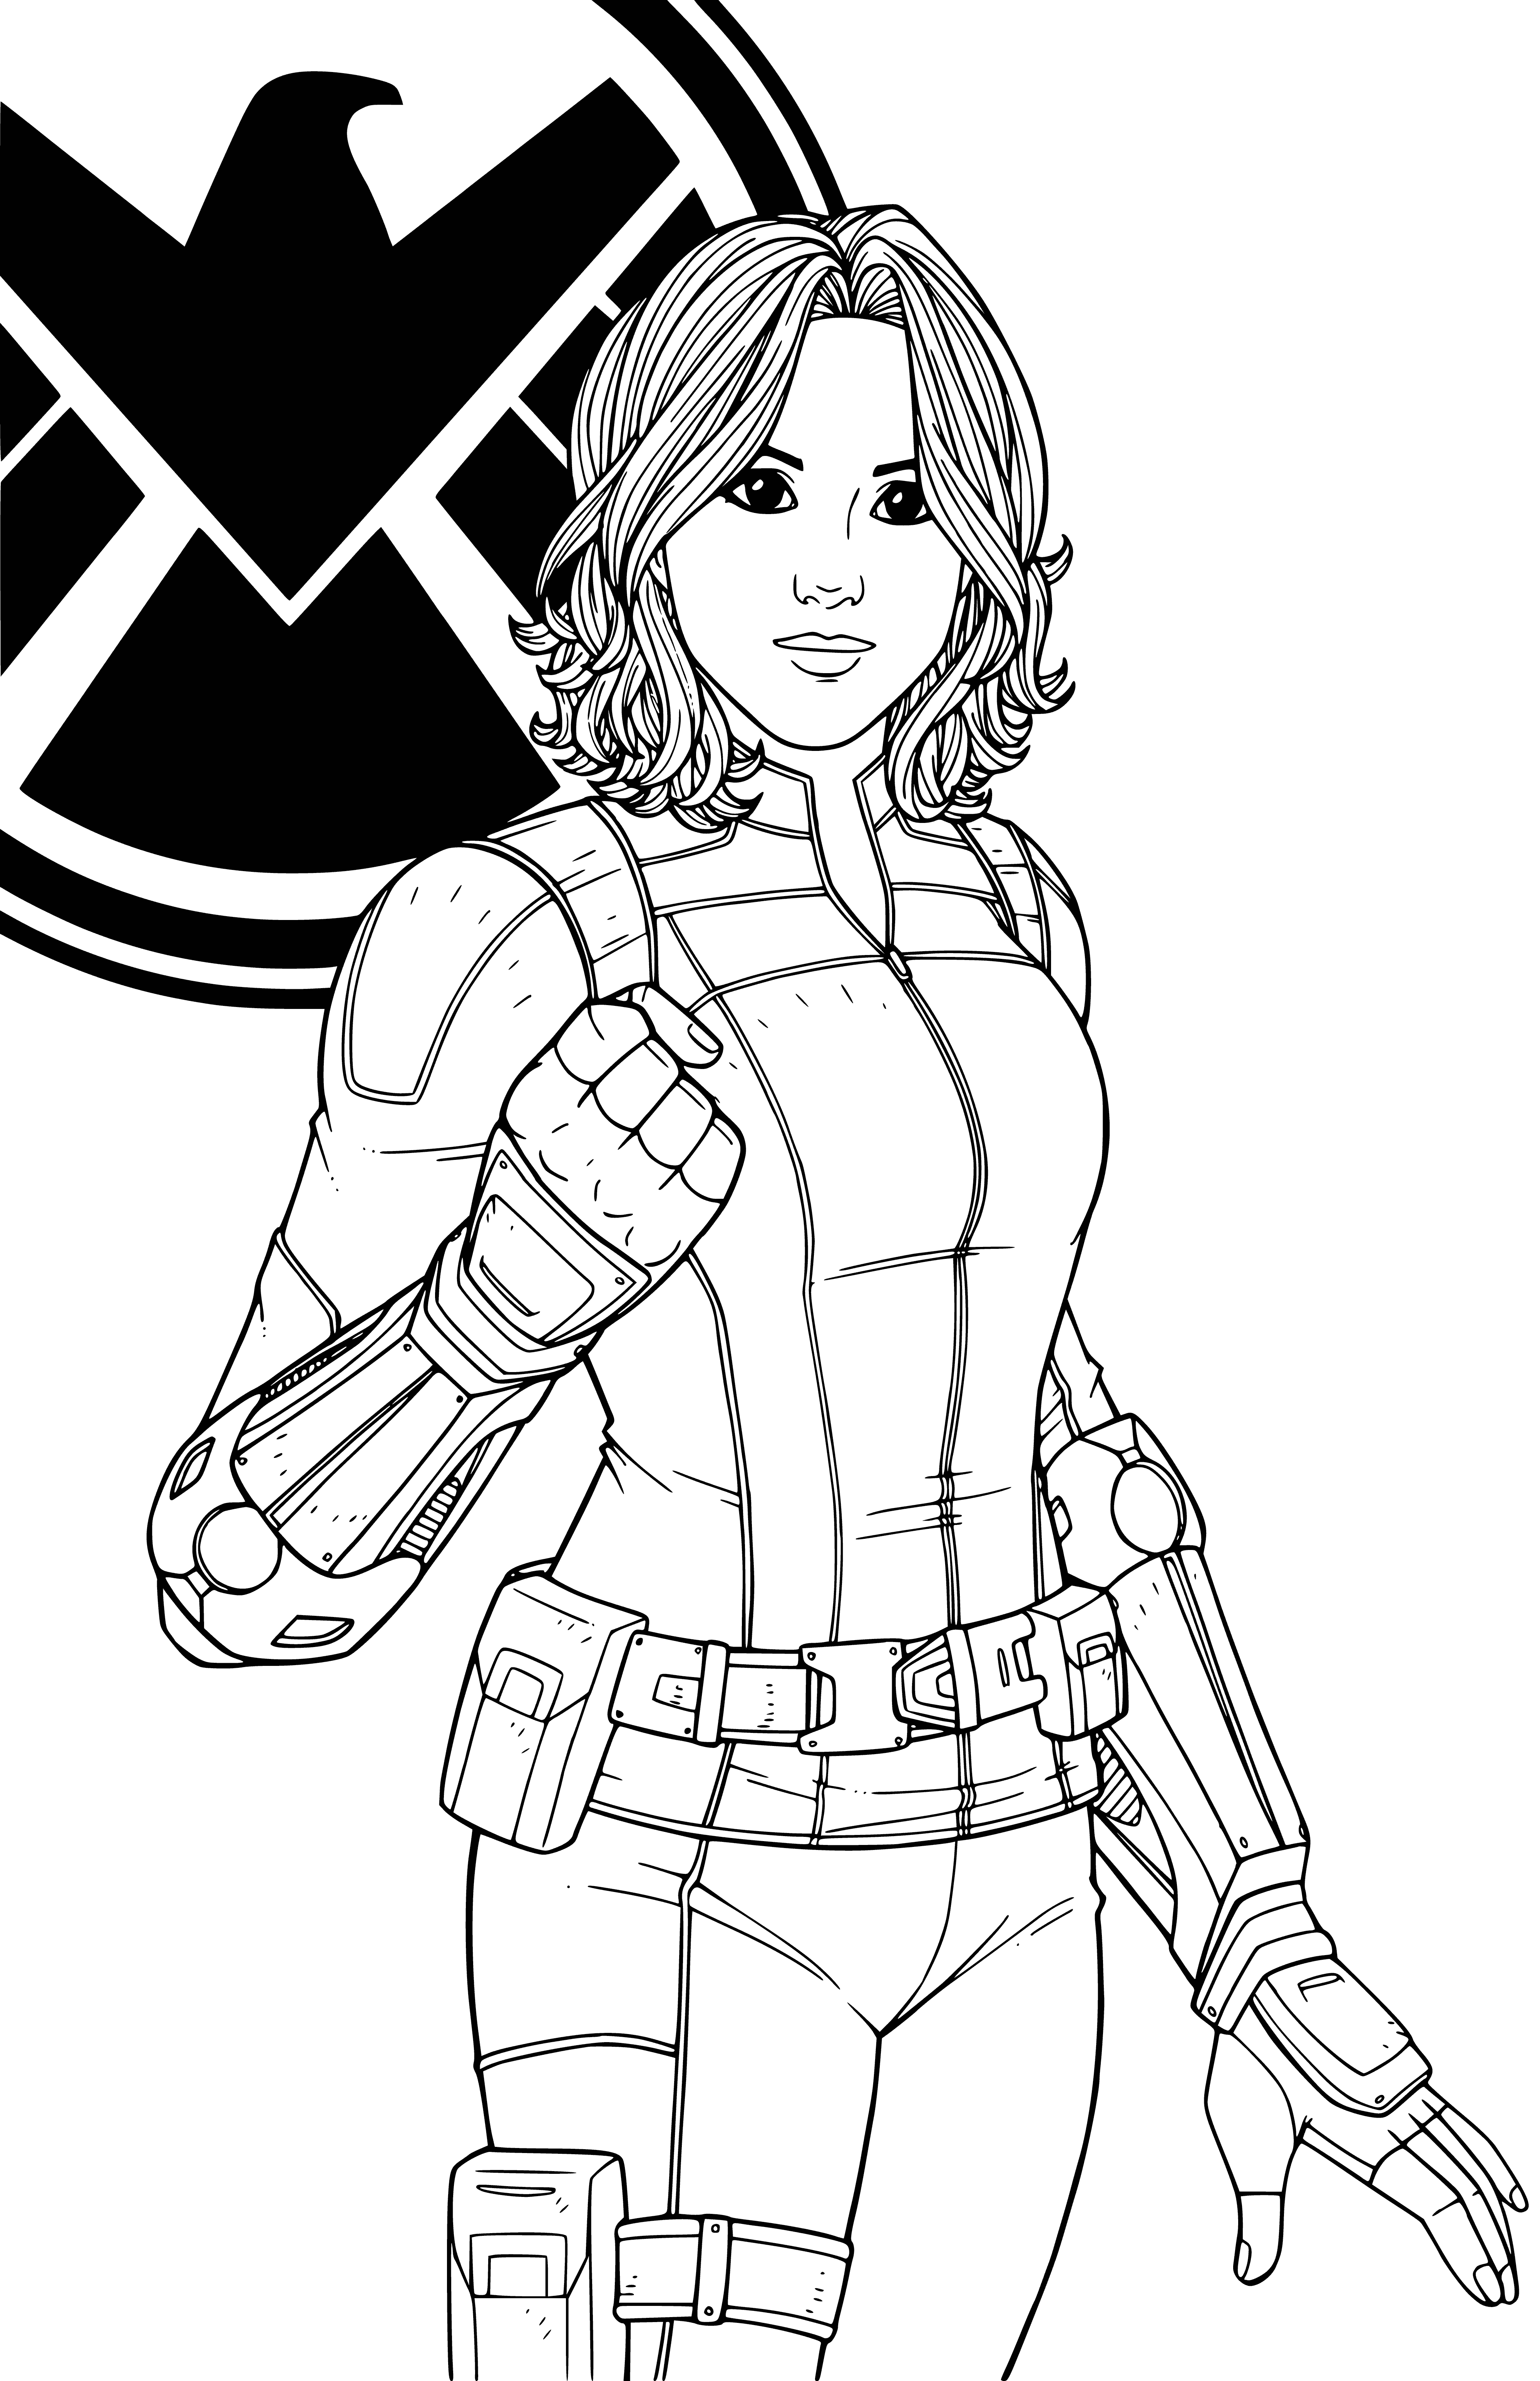 Agent SHIELD T. Daisy Johnson coloring page